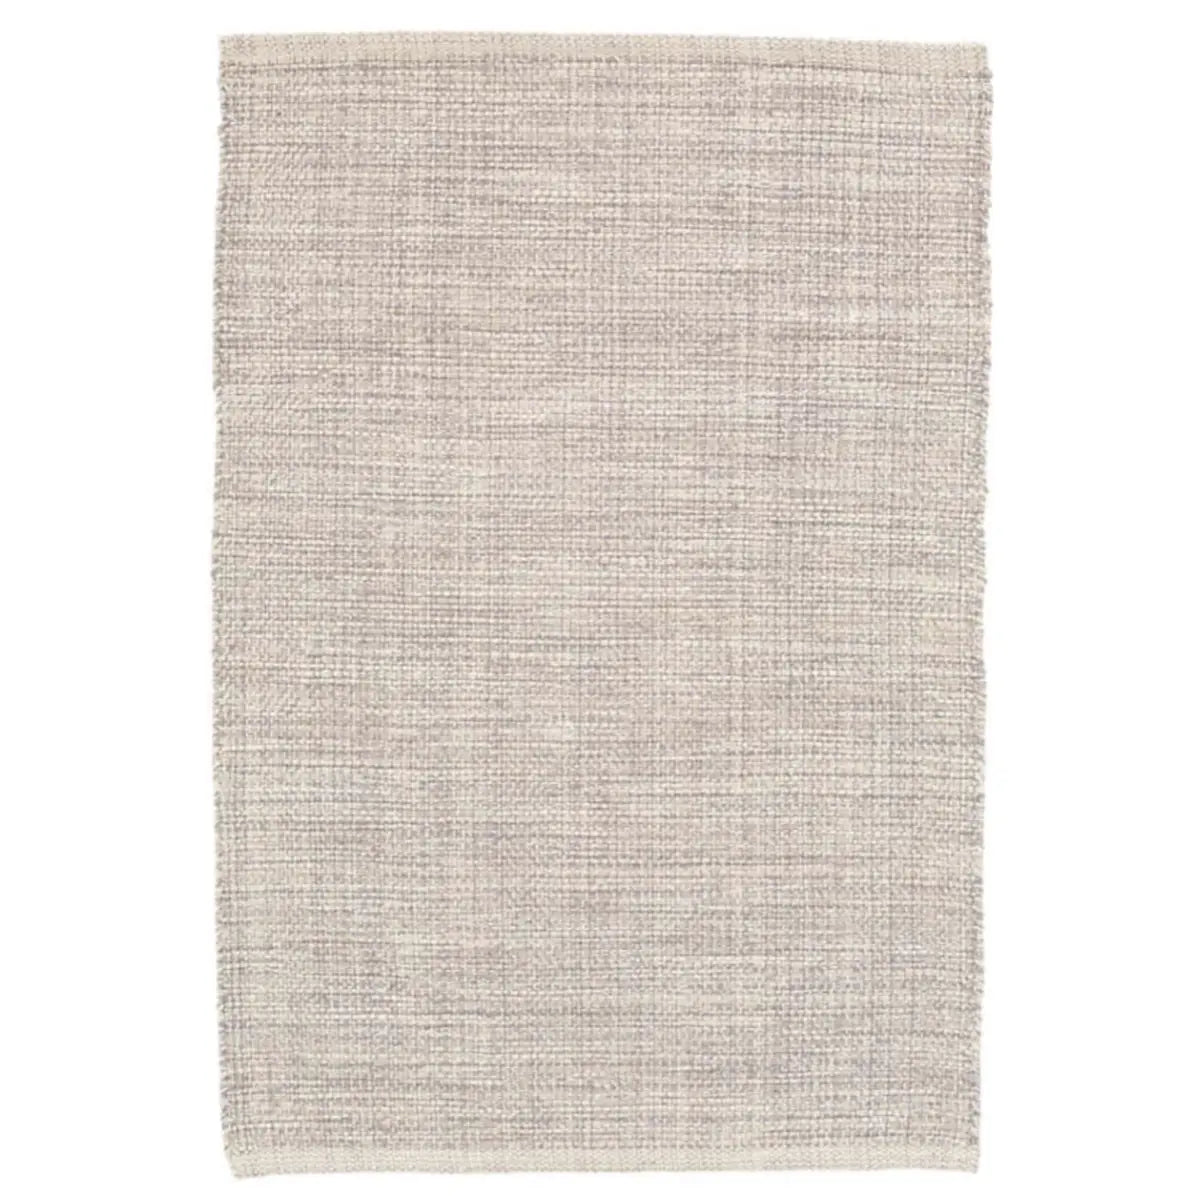 Marled Grey Woven Cotton Rug - Home Smith